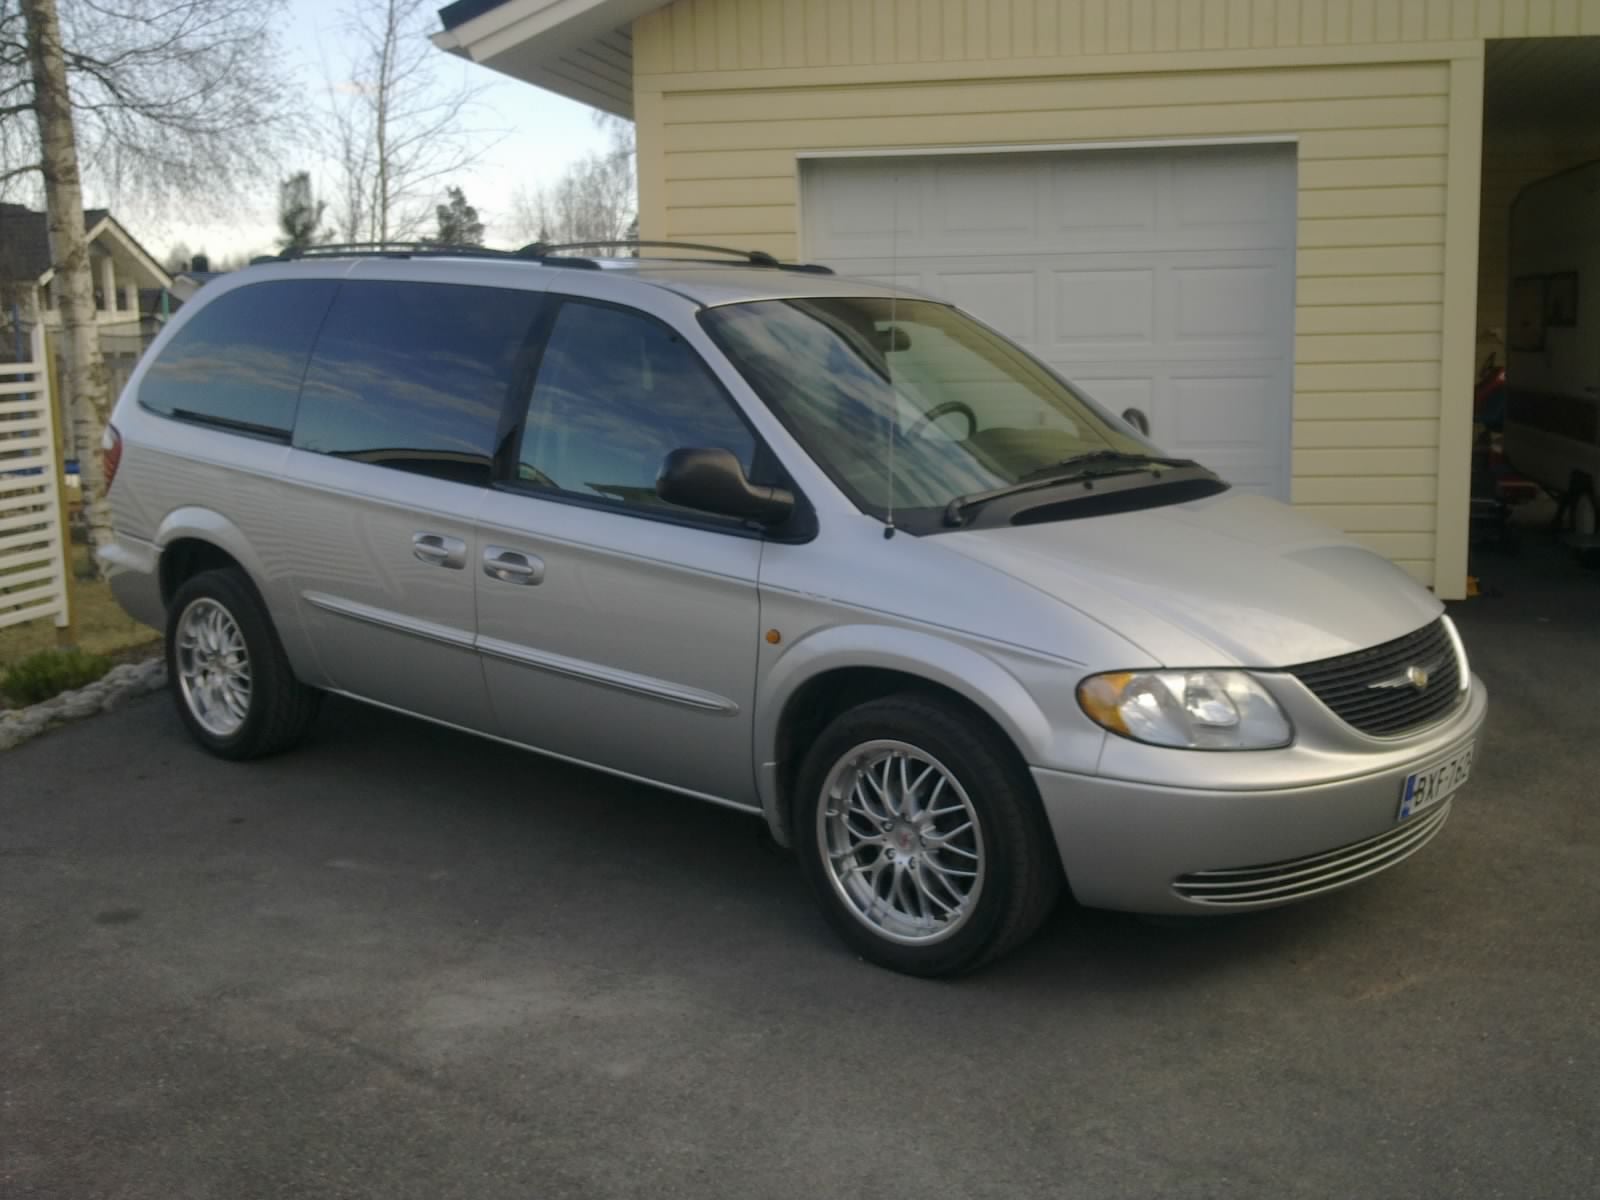 2000 Chrysler town and country consumer reviews #3